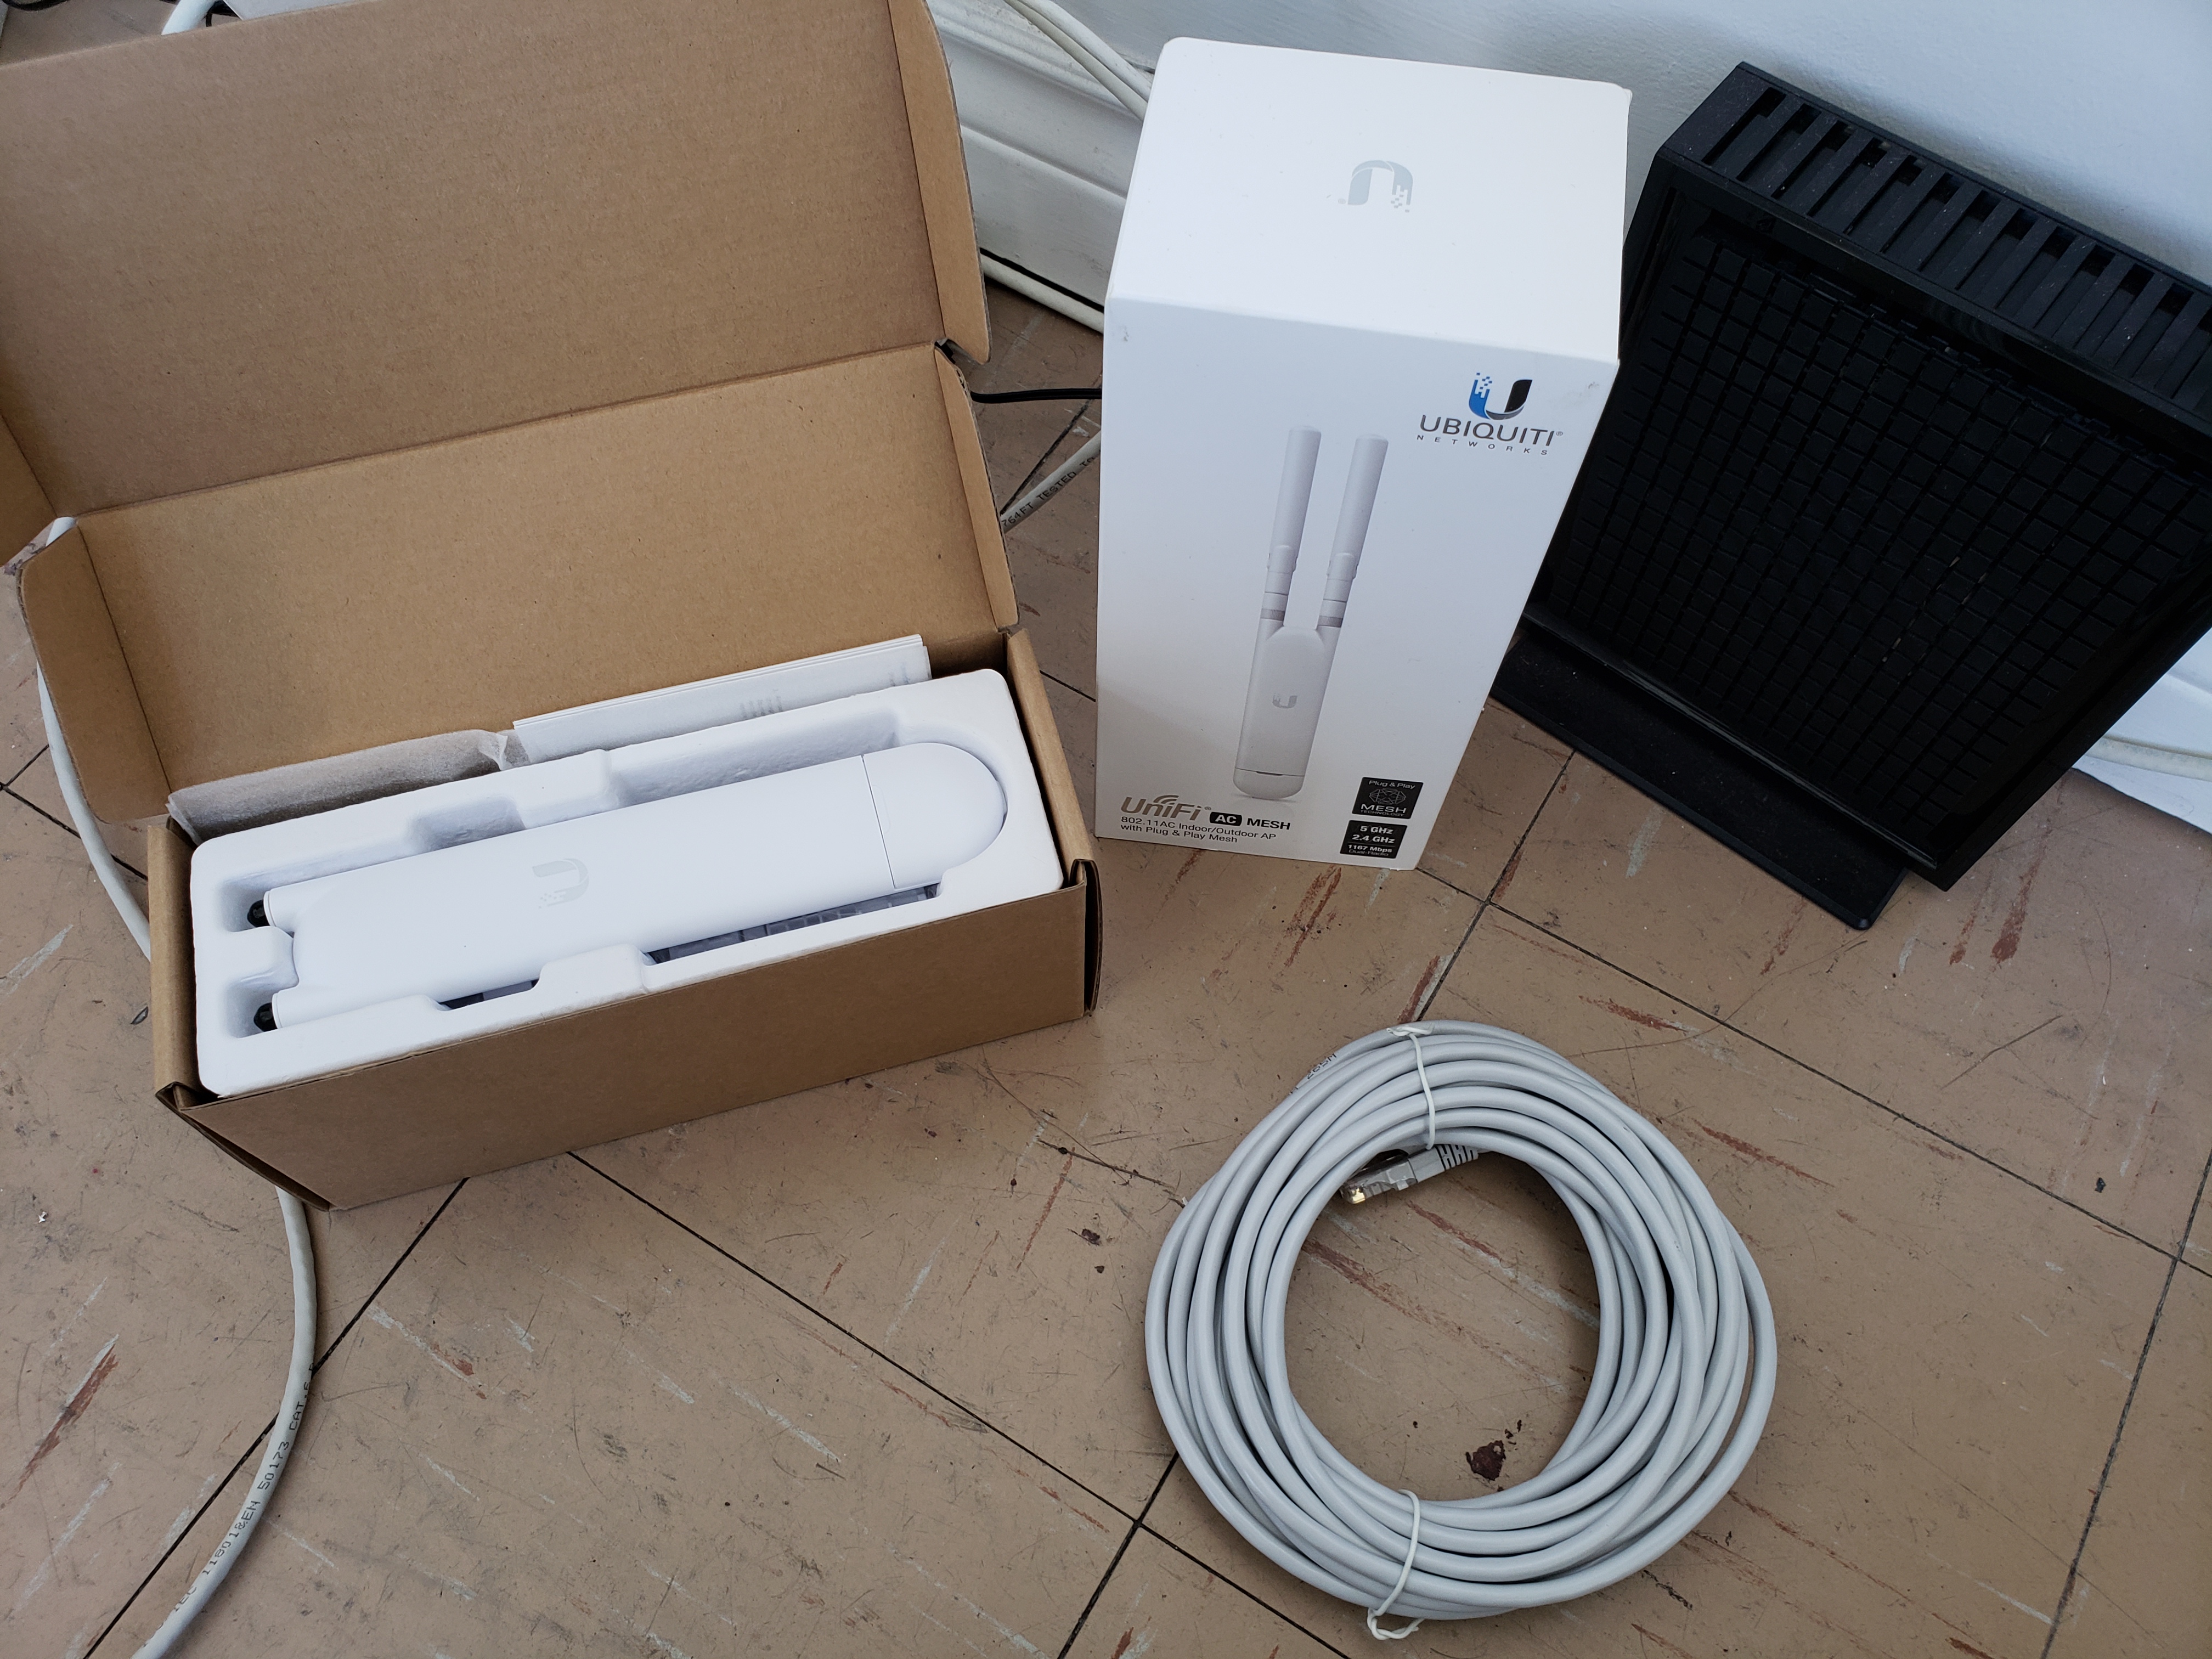 new unifi wifi access point unboxed